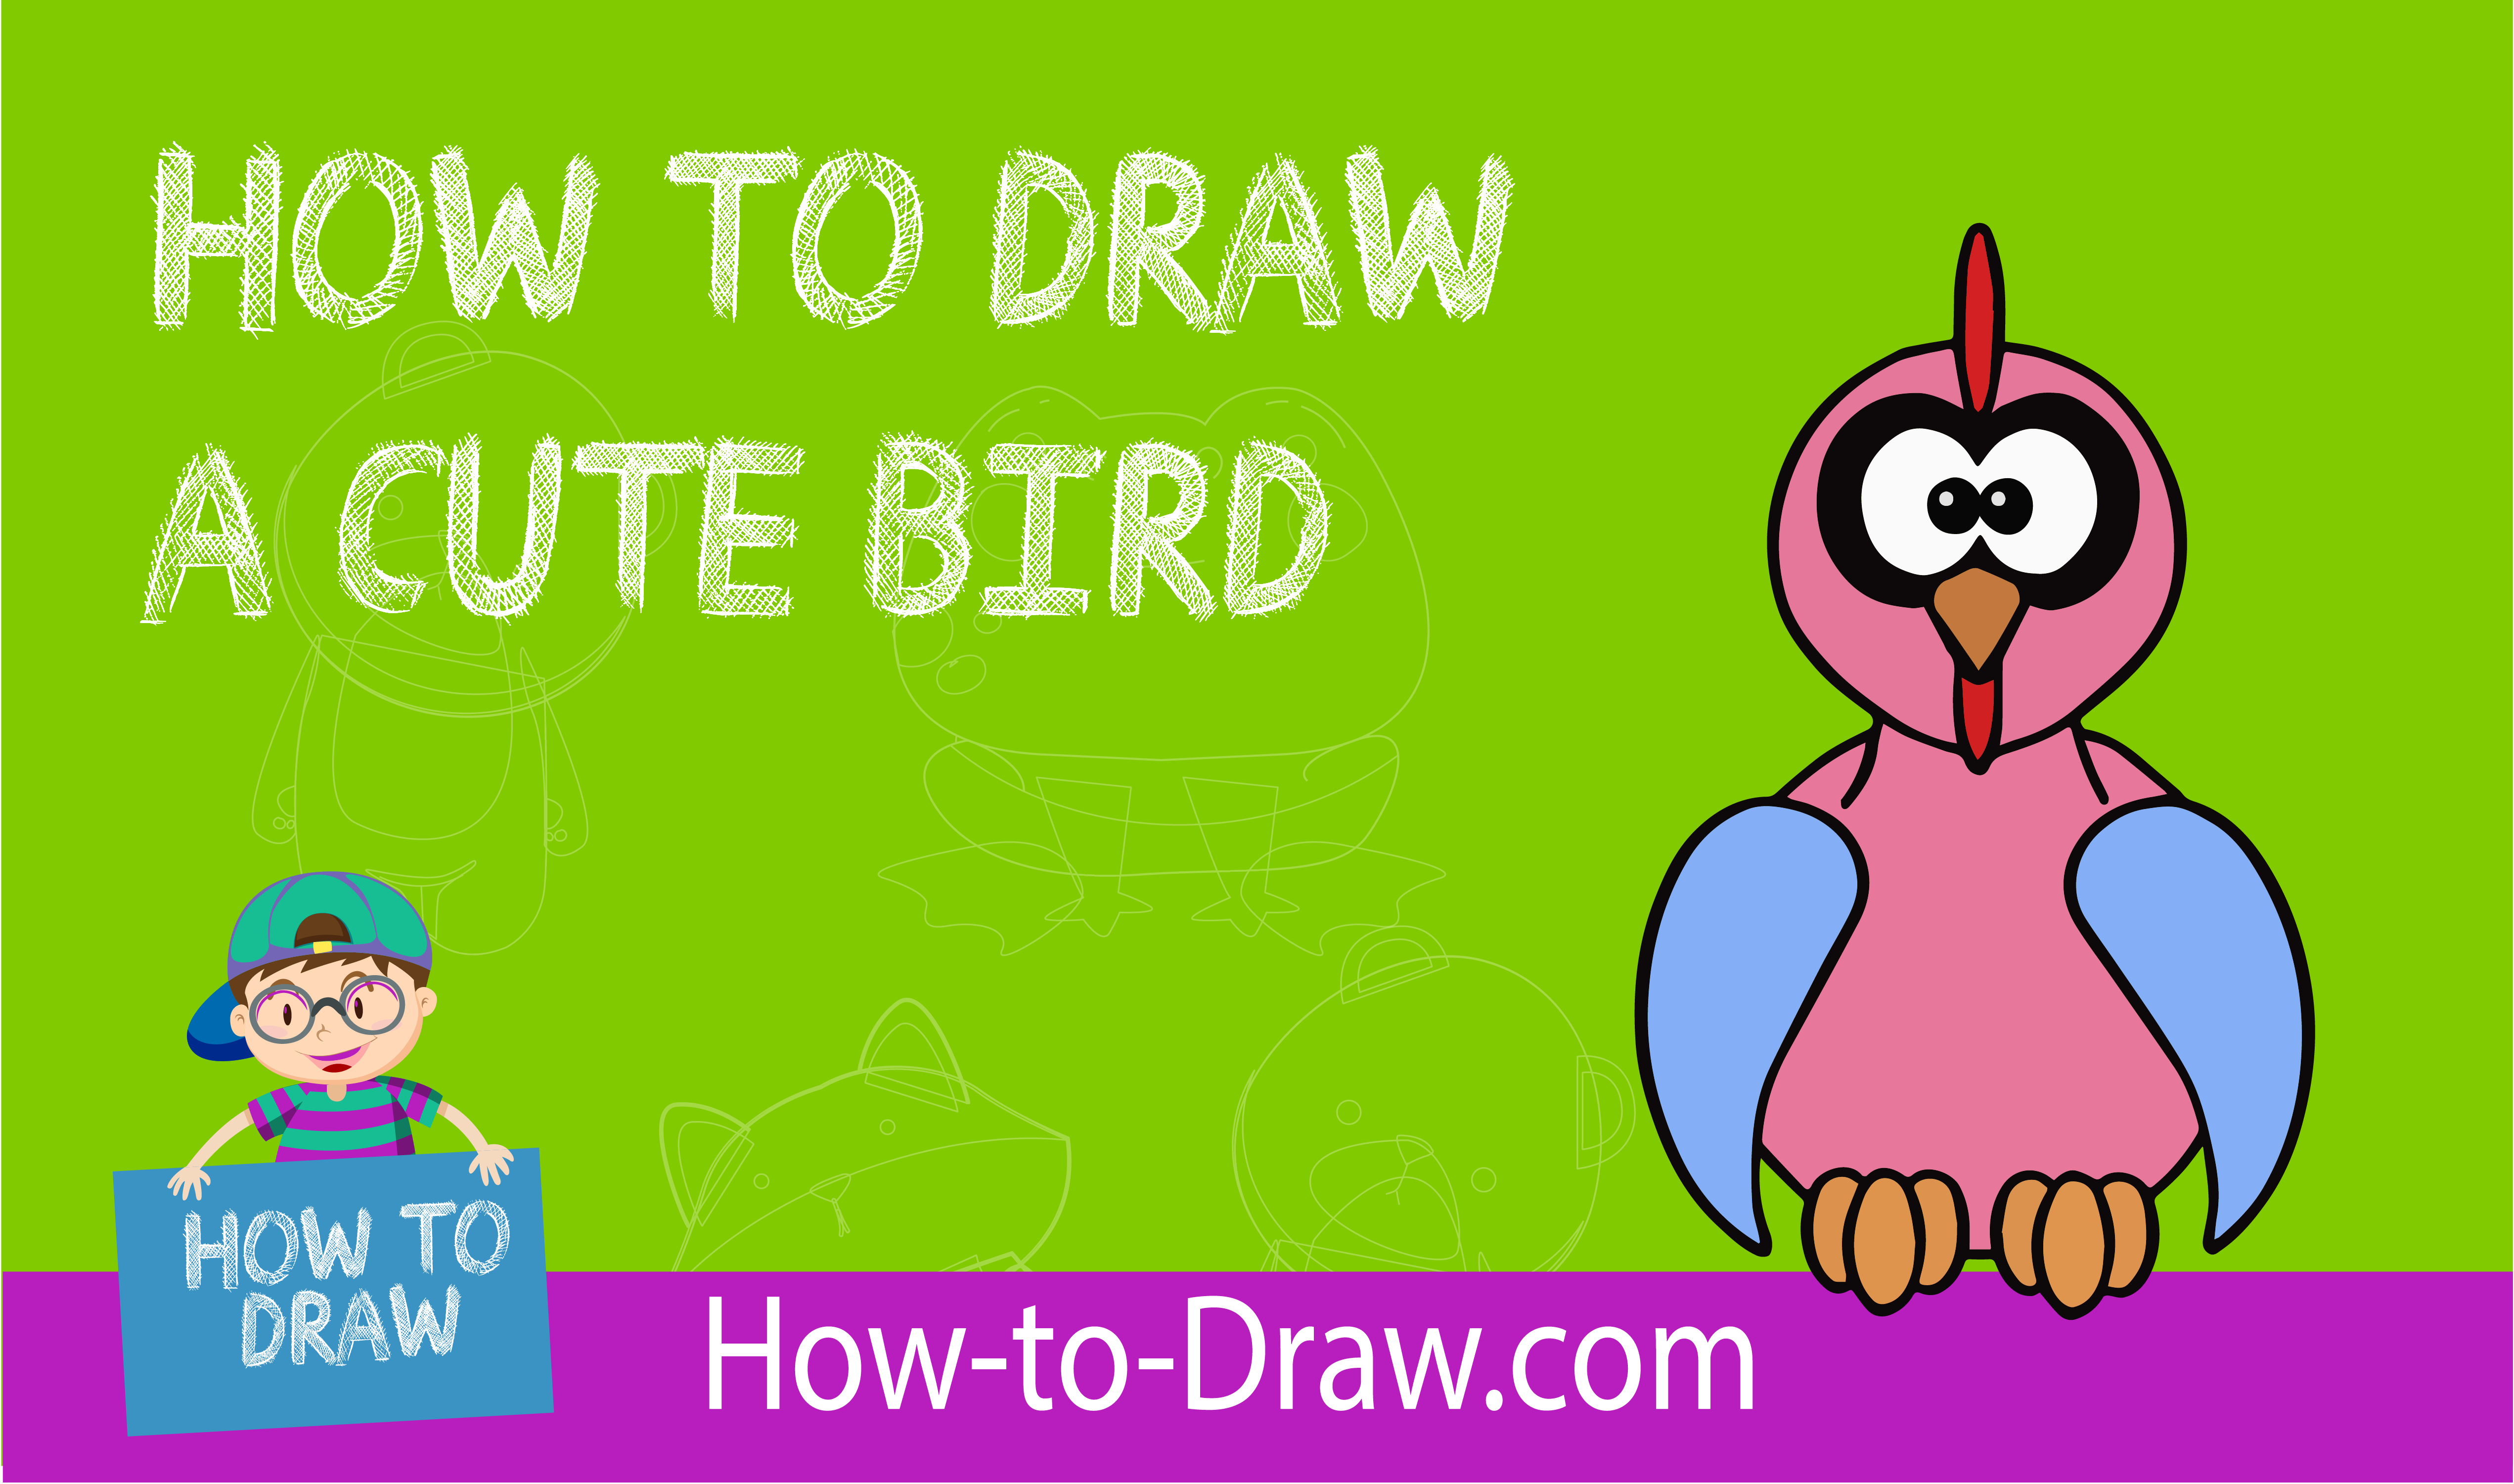 How to Draw a Cute Bird